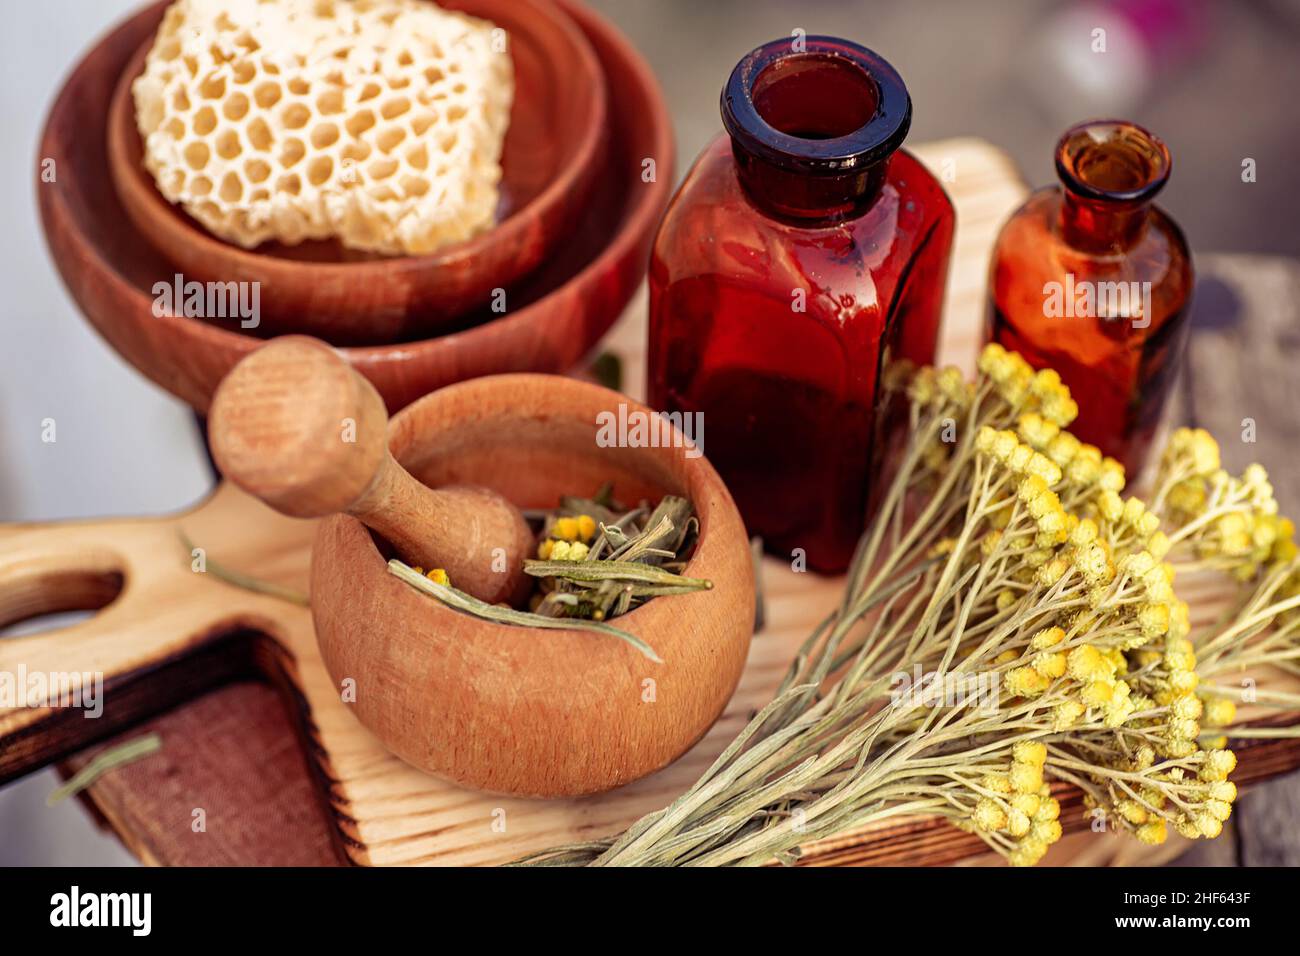 immortelle ,Curry Plant, Herb of St. John, Immortelle and botanically, Helichrysum arenarium dry herbs in a mortar. and honey in honeycombs. Ingredien Stock Photo